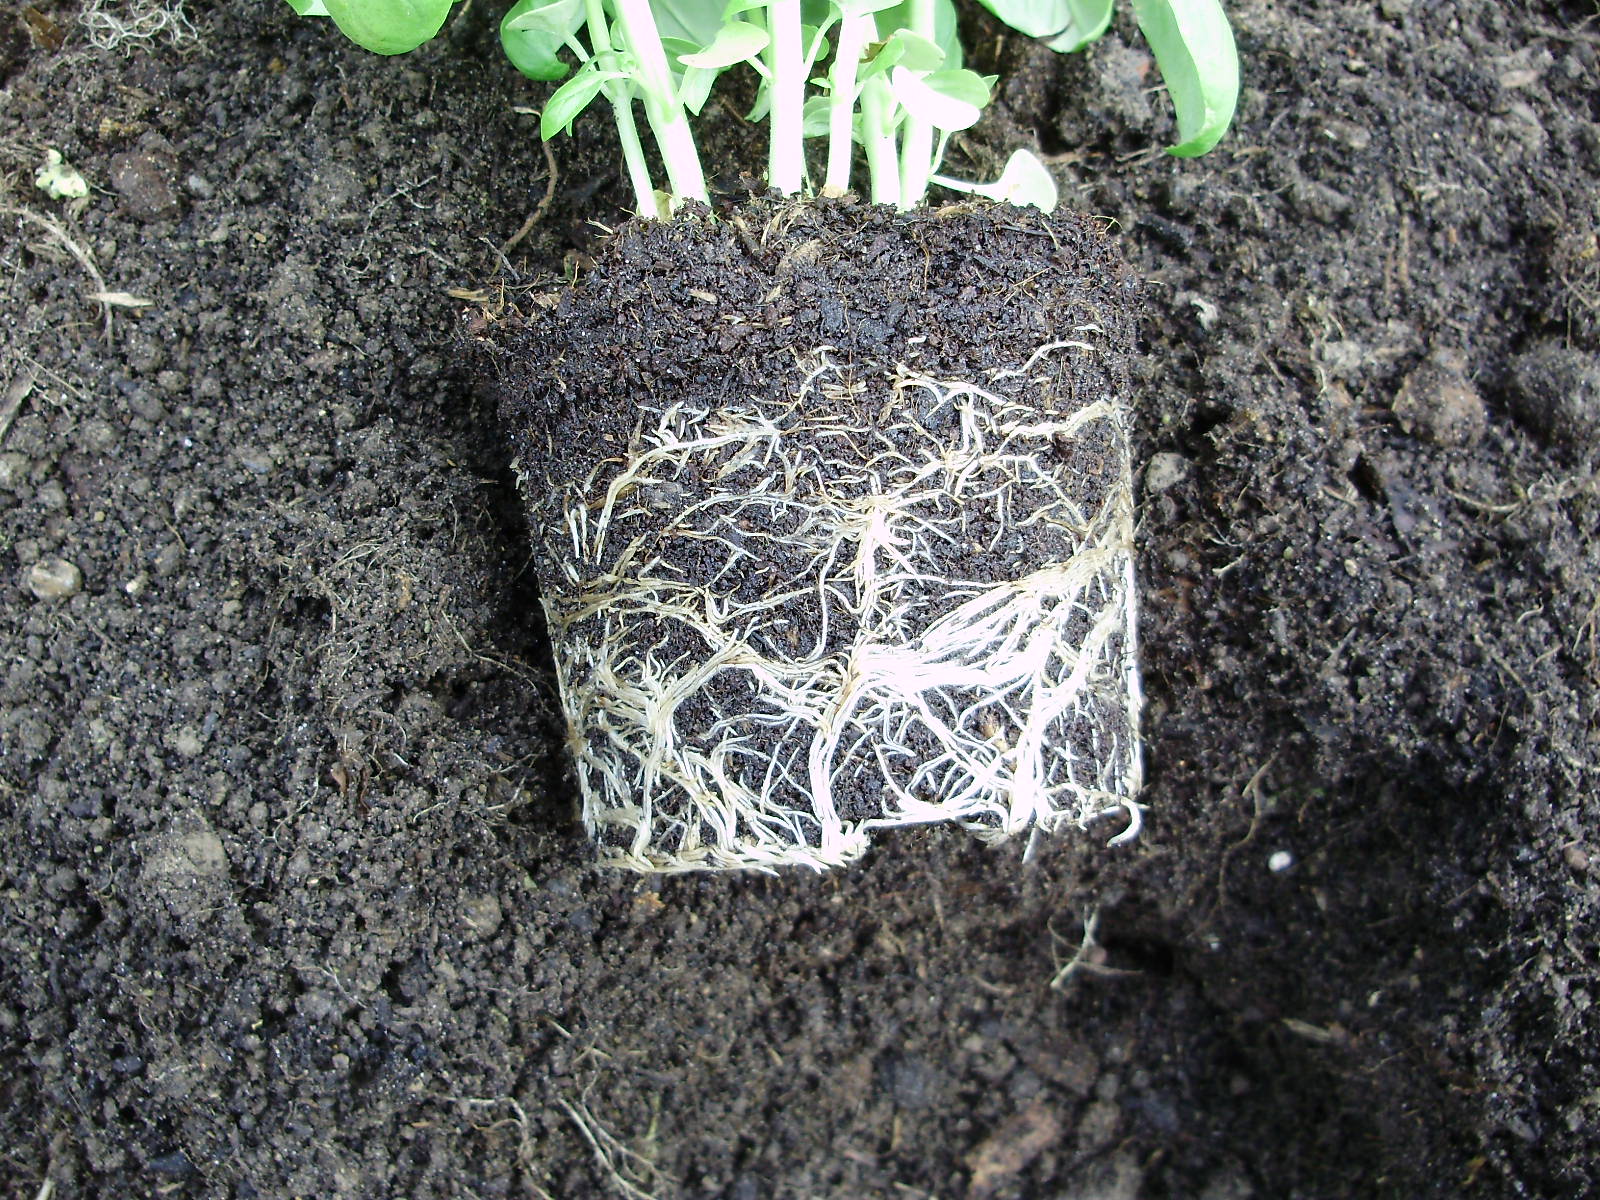 11. Pot nicely filled - roots ready to explore further